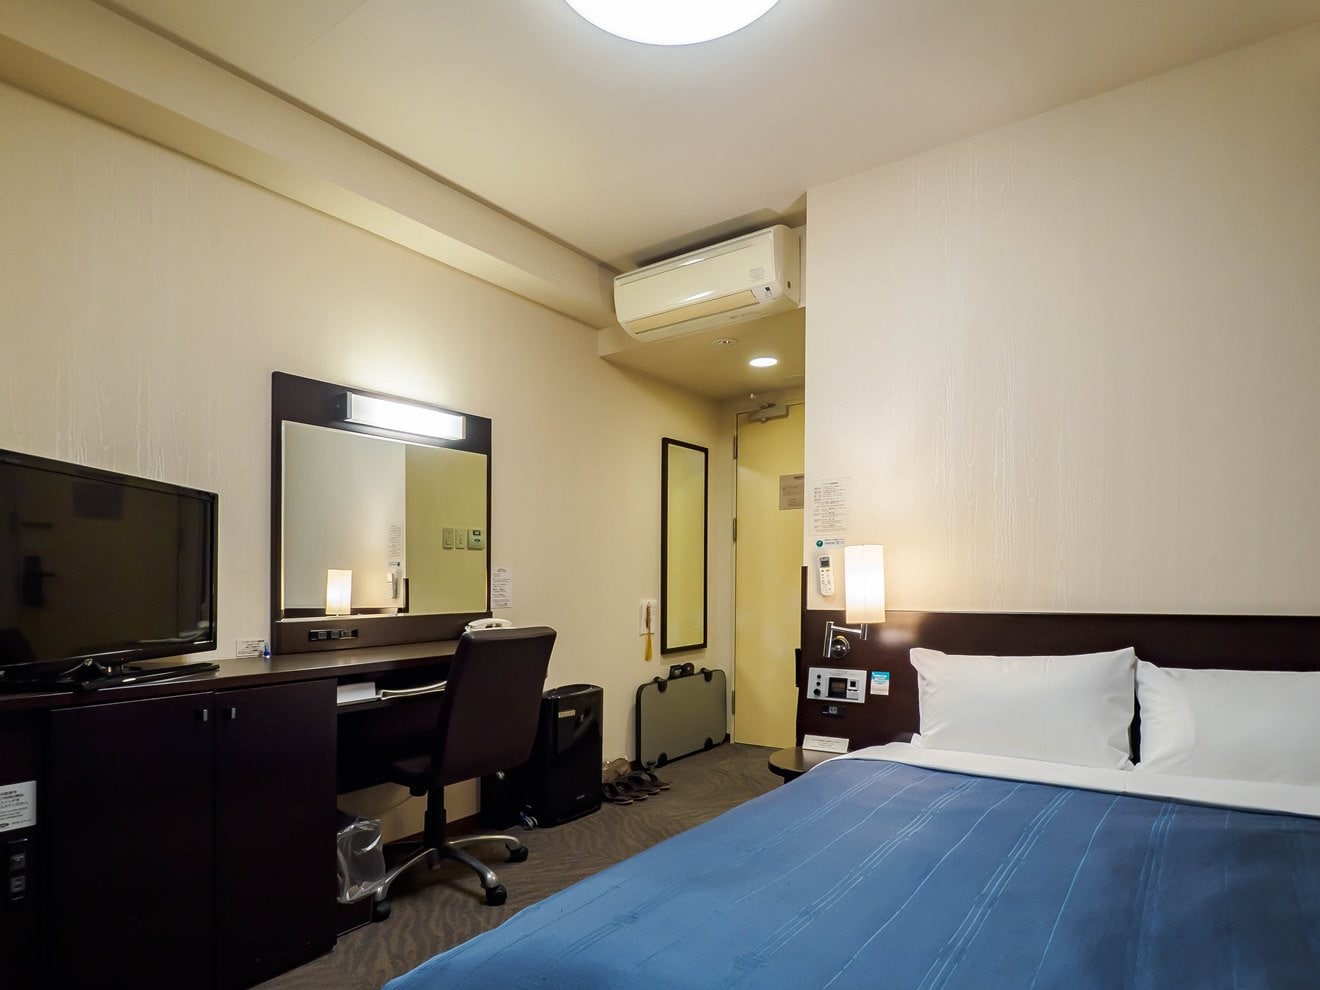  ■ Comfort semi-double room ■ Ideal for couples and couples.